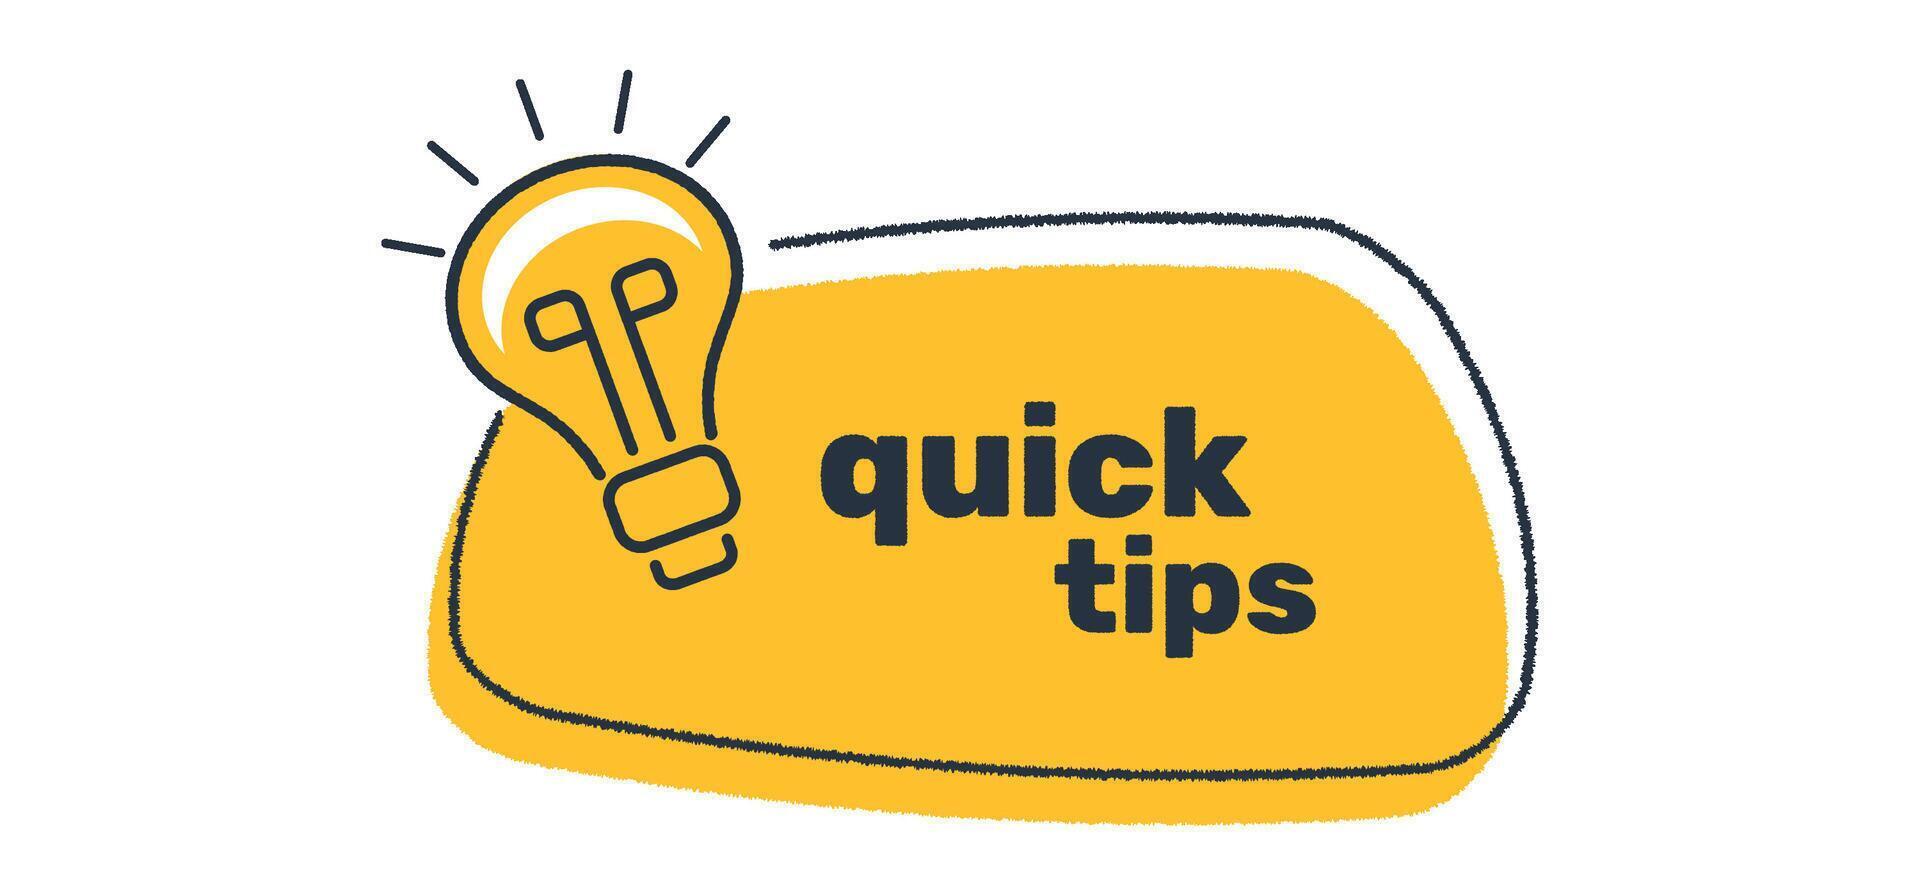 Quick tips badge in yellow with a light bulb. Speech bubble with quick tips text. Flat modern minimal trend. illustration. vector